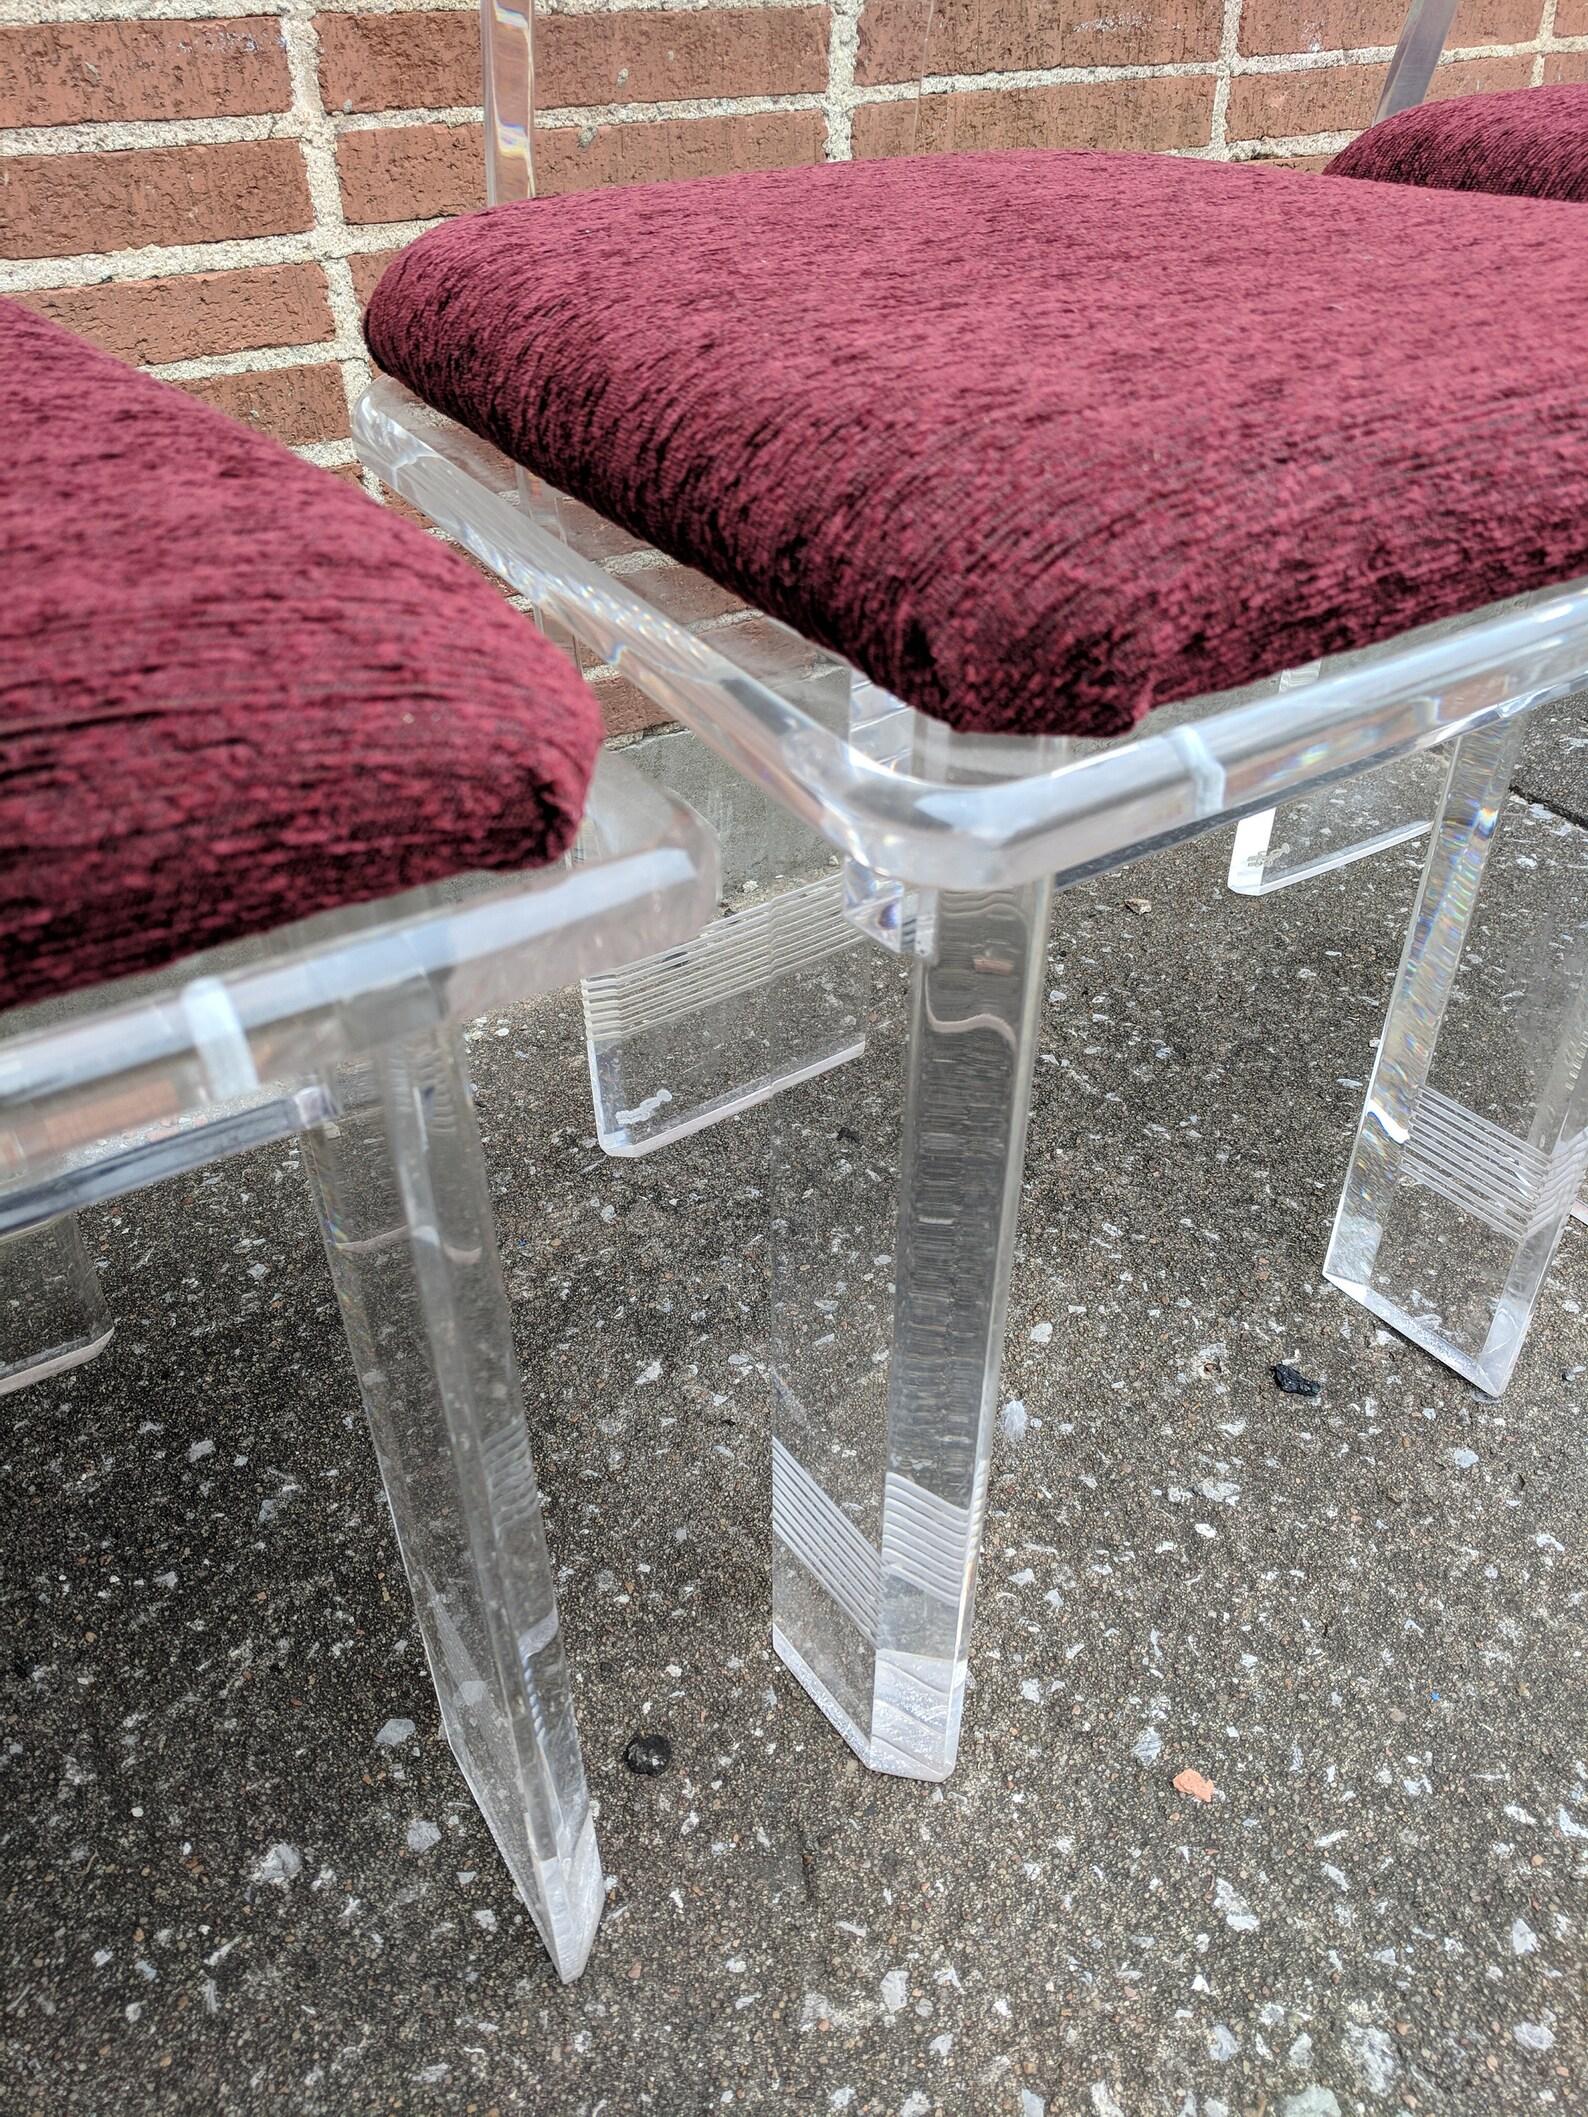 Mid Century Modern Acrylicore Lucite Dining Chairs

Above average condition and structurally sound.  Please request additional pictures. Have expected age related wear and scratching. Upholstery in good condition with very little to negligible